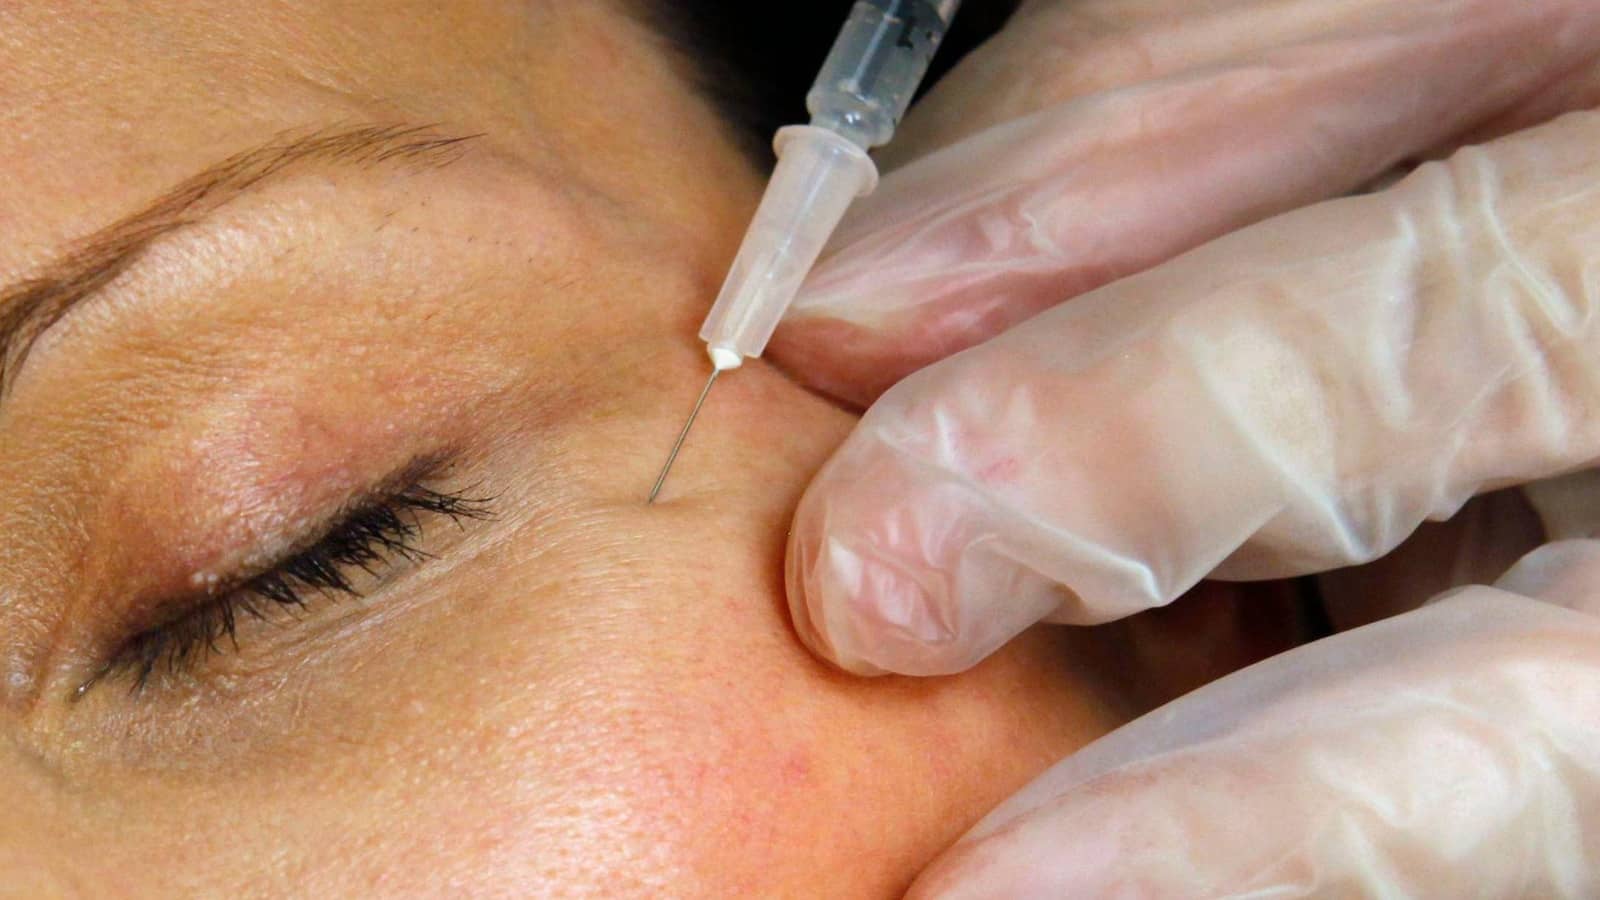 US health officials warn of counterfeit Botox injections